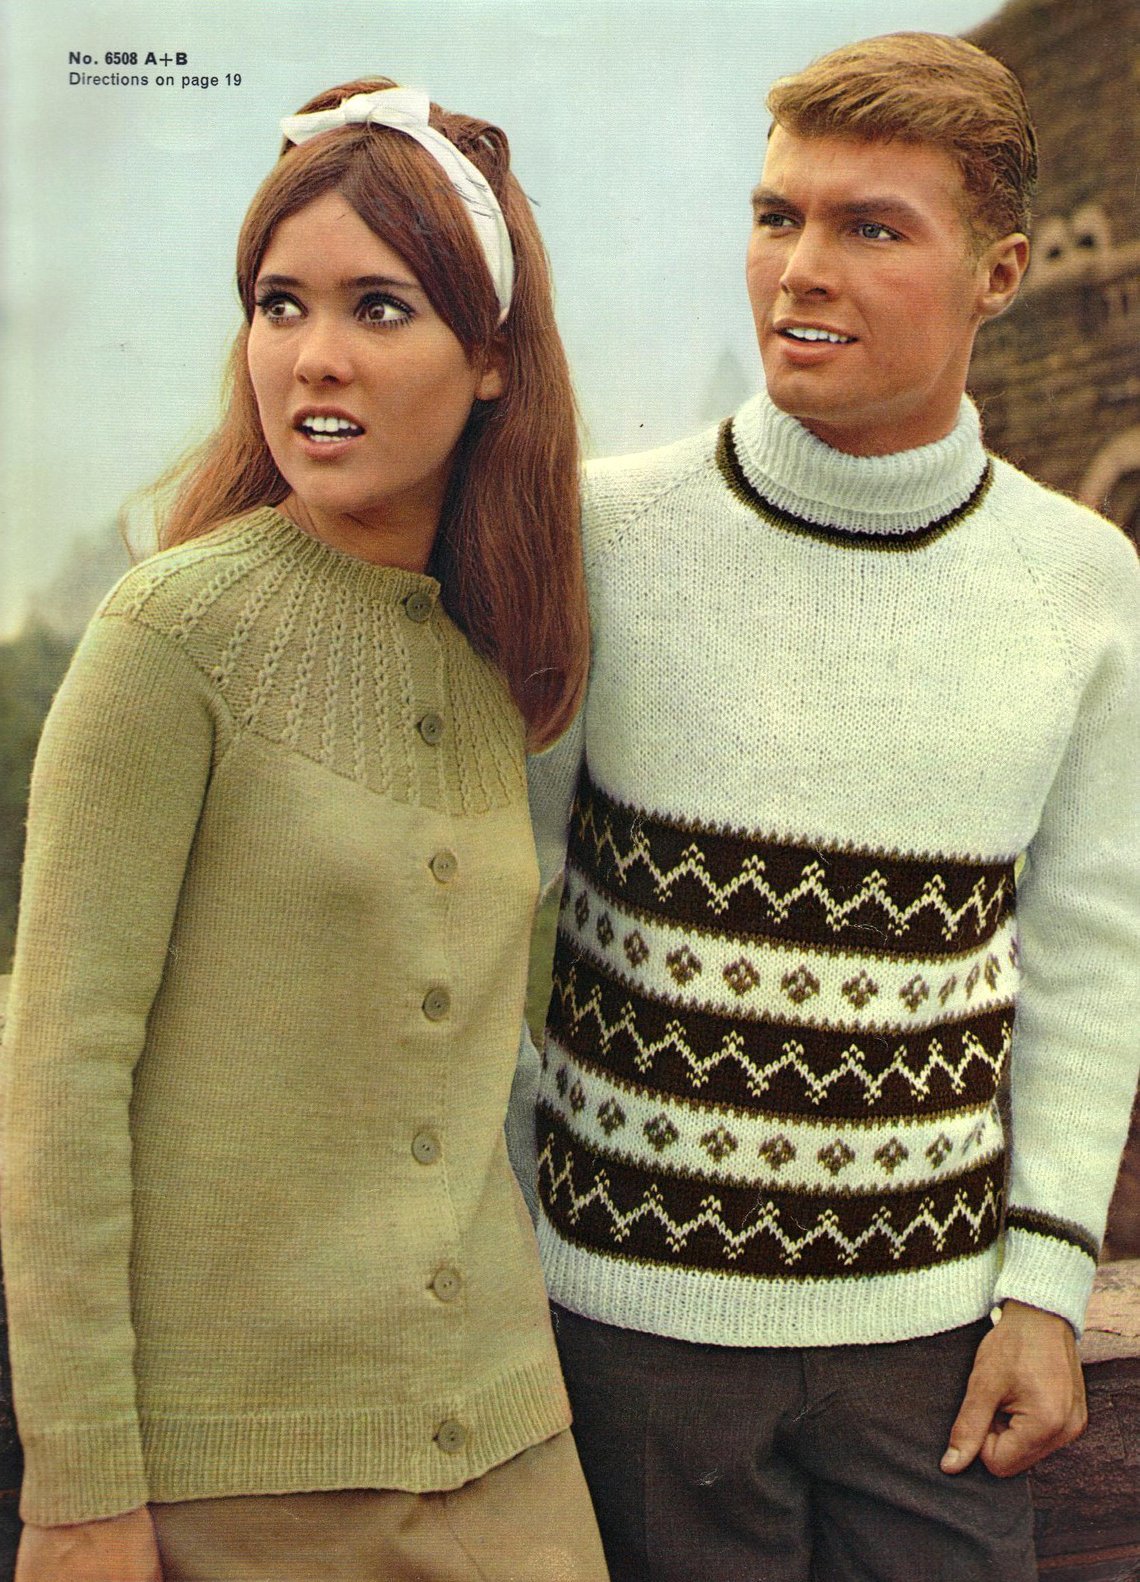 What Are They Looking At? Vintage Sweater Models Staring At God-Knows ...